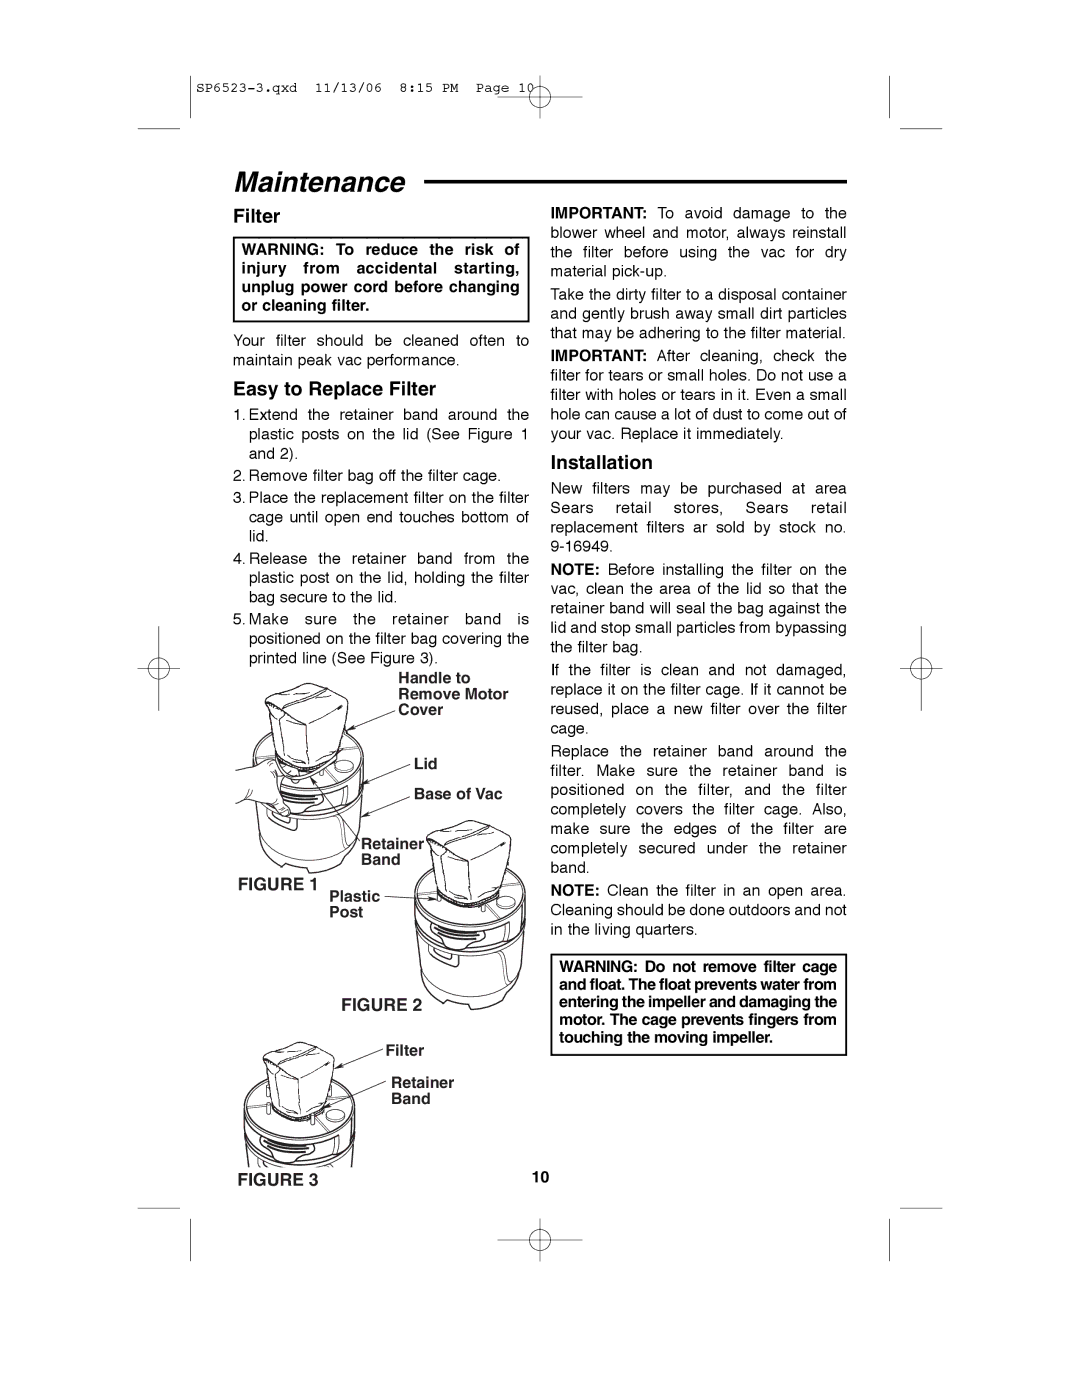 Craftsman 113.177135 owner manual Maintenance, Easy to Replace Filter, Installation 